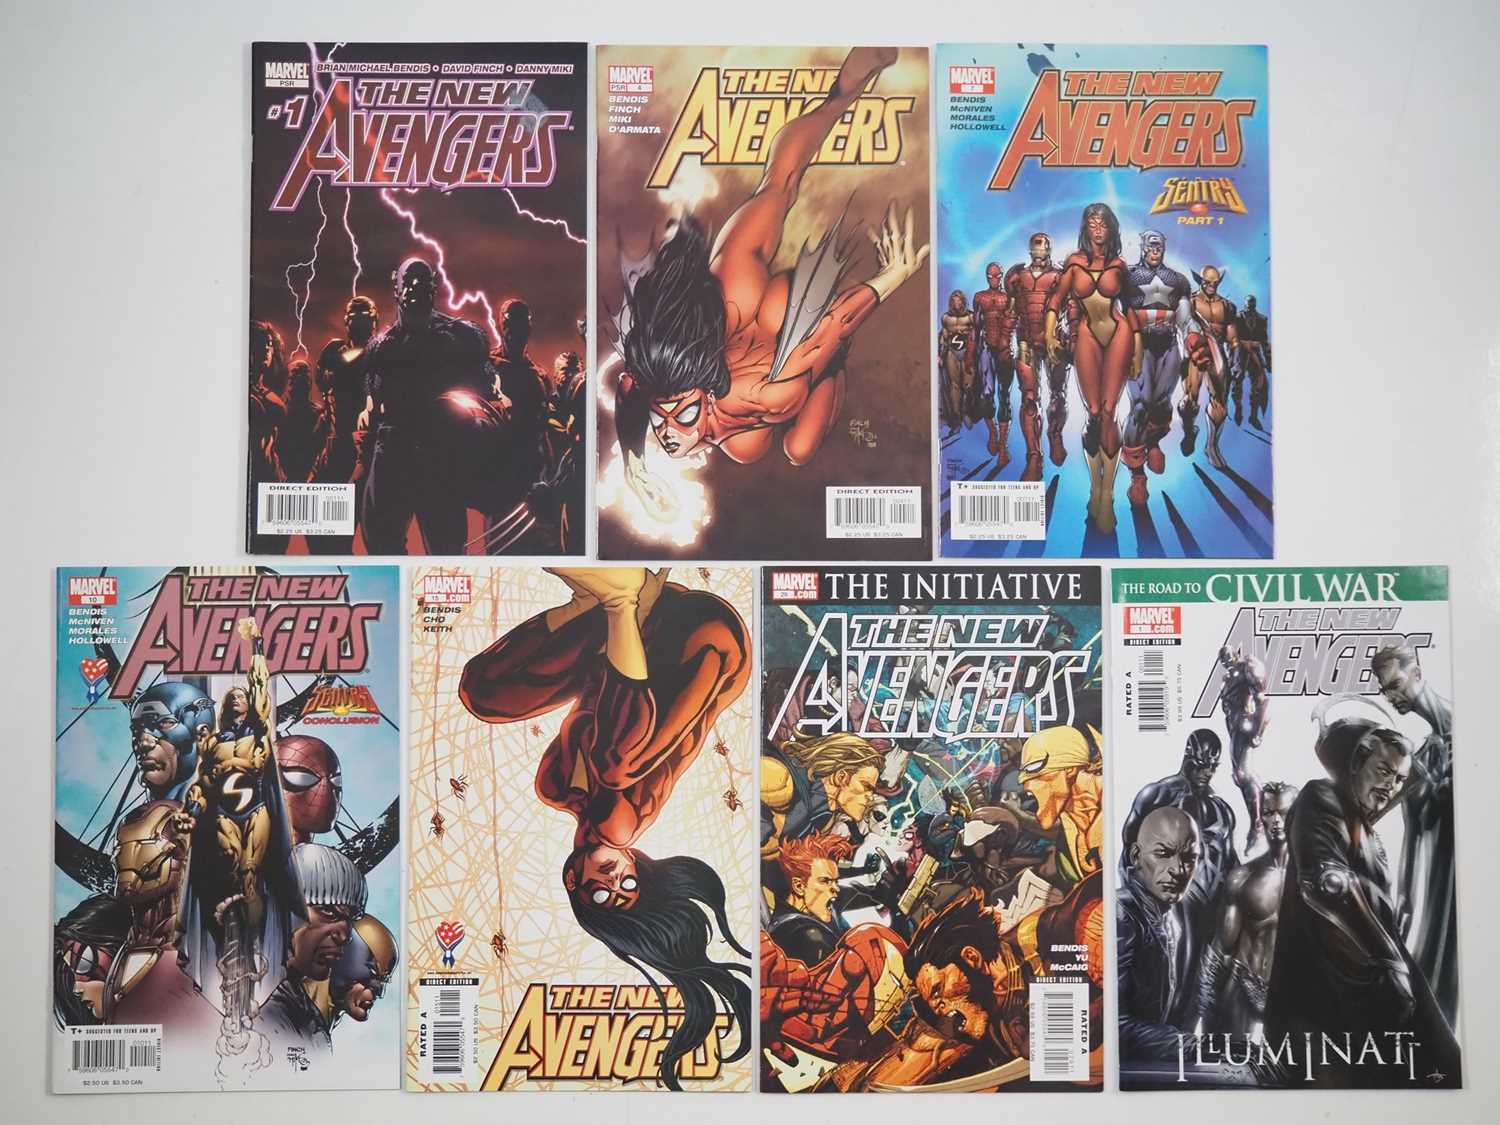 NEW AVENGERS LOT (7 in Lot) - Includes NEW AVENGERS #1, 4, 7, 10, 15, 29 + THE NEW AVENGERS: